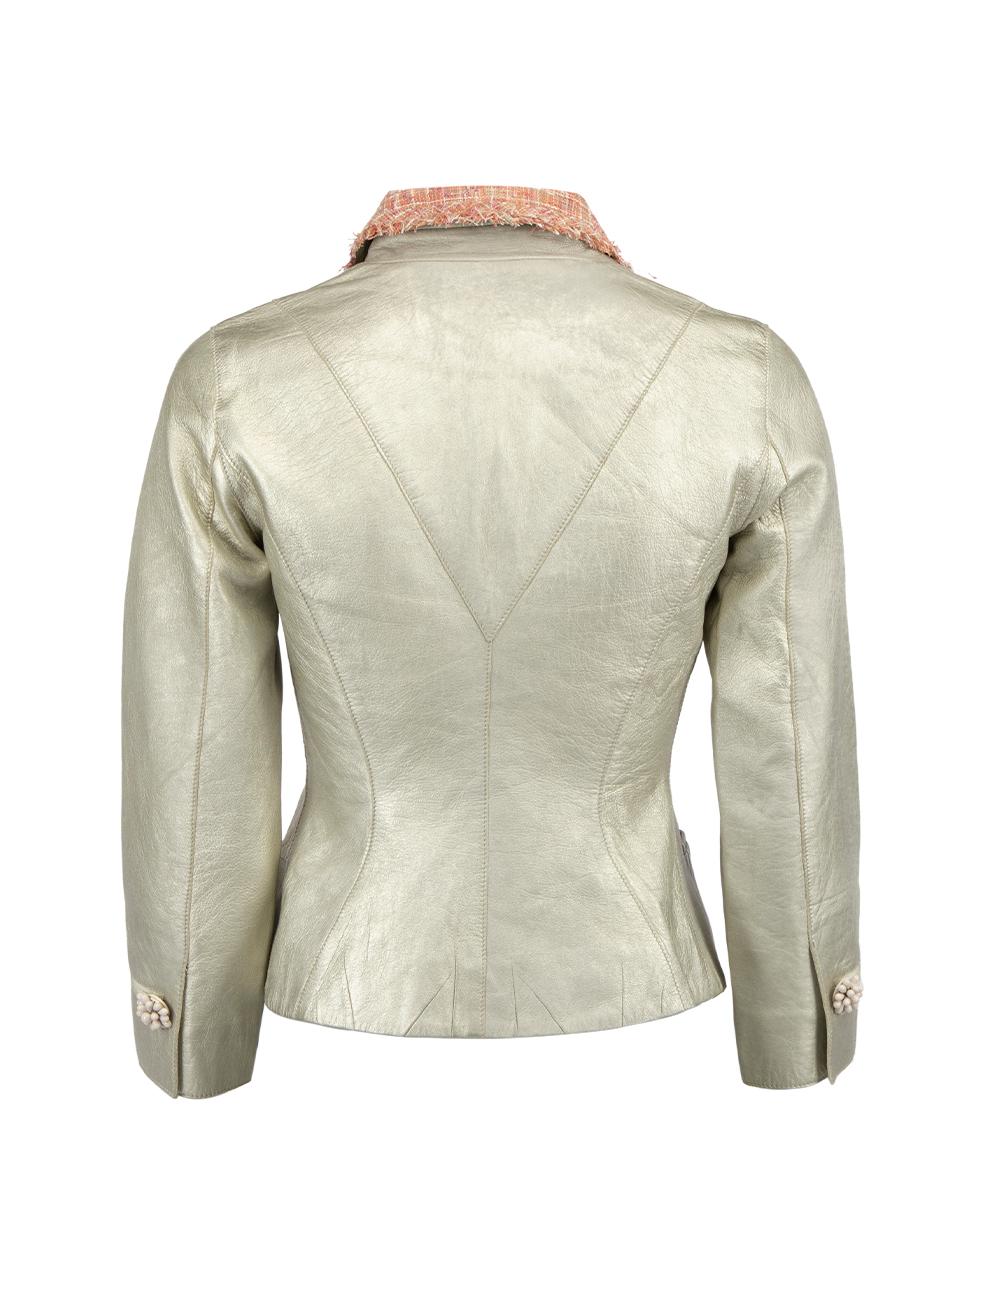 Pre-Loved Louis Vuitton Women's Metallic Blue Leather Cropped Fitted Jacket In Excellent Condition In London, GB